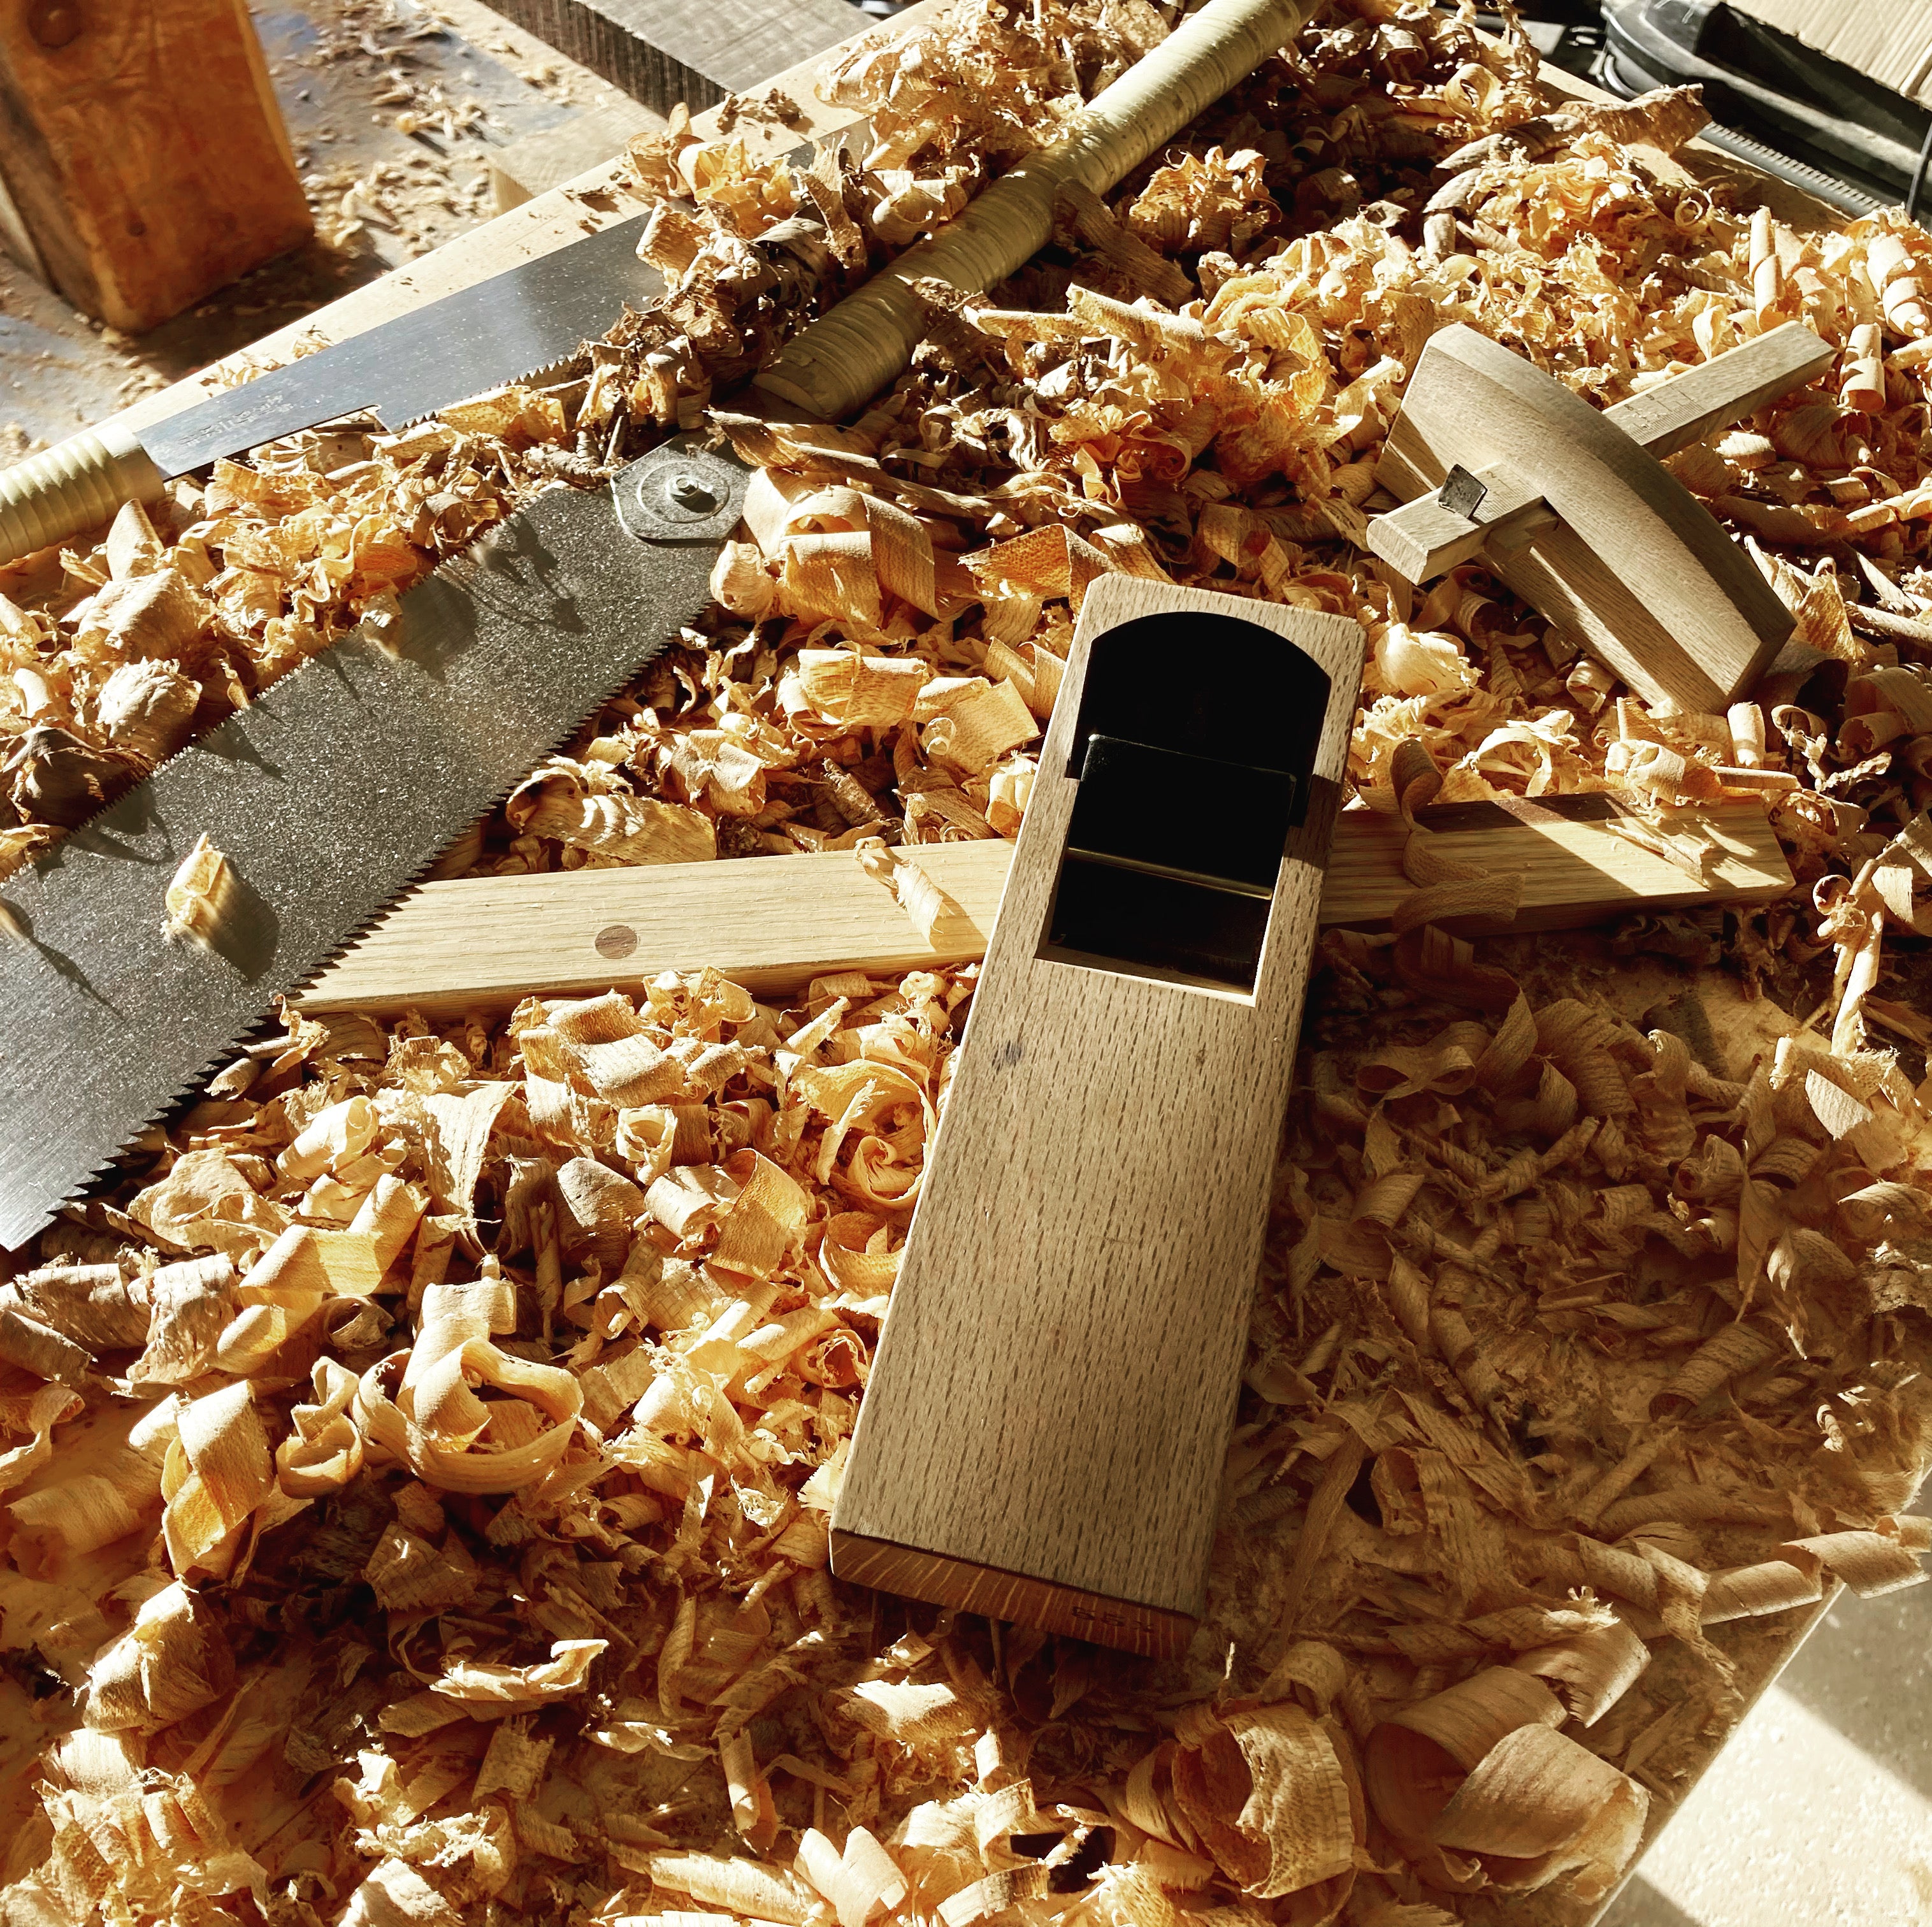 Handtools - Japanese plane or Kana in a pile of wood shavings